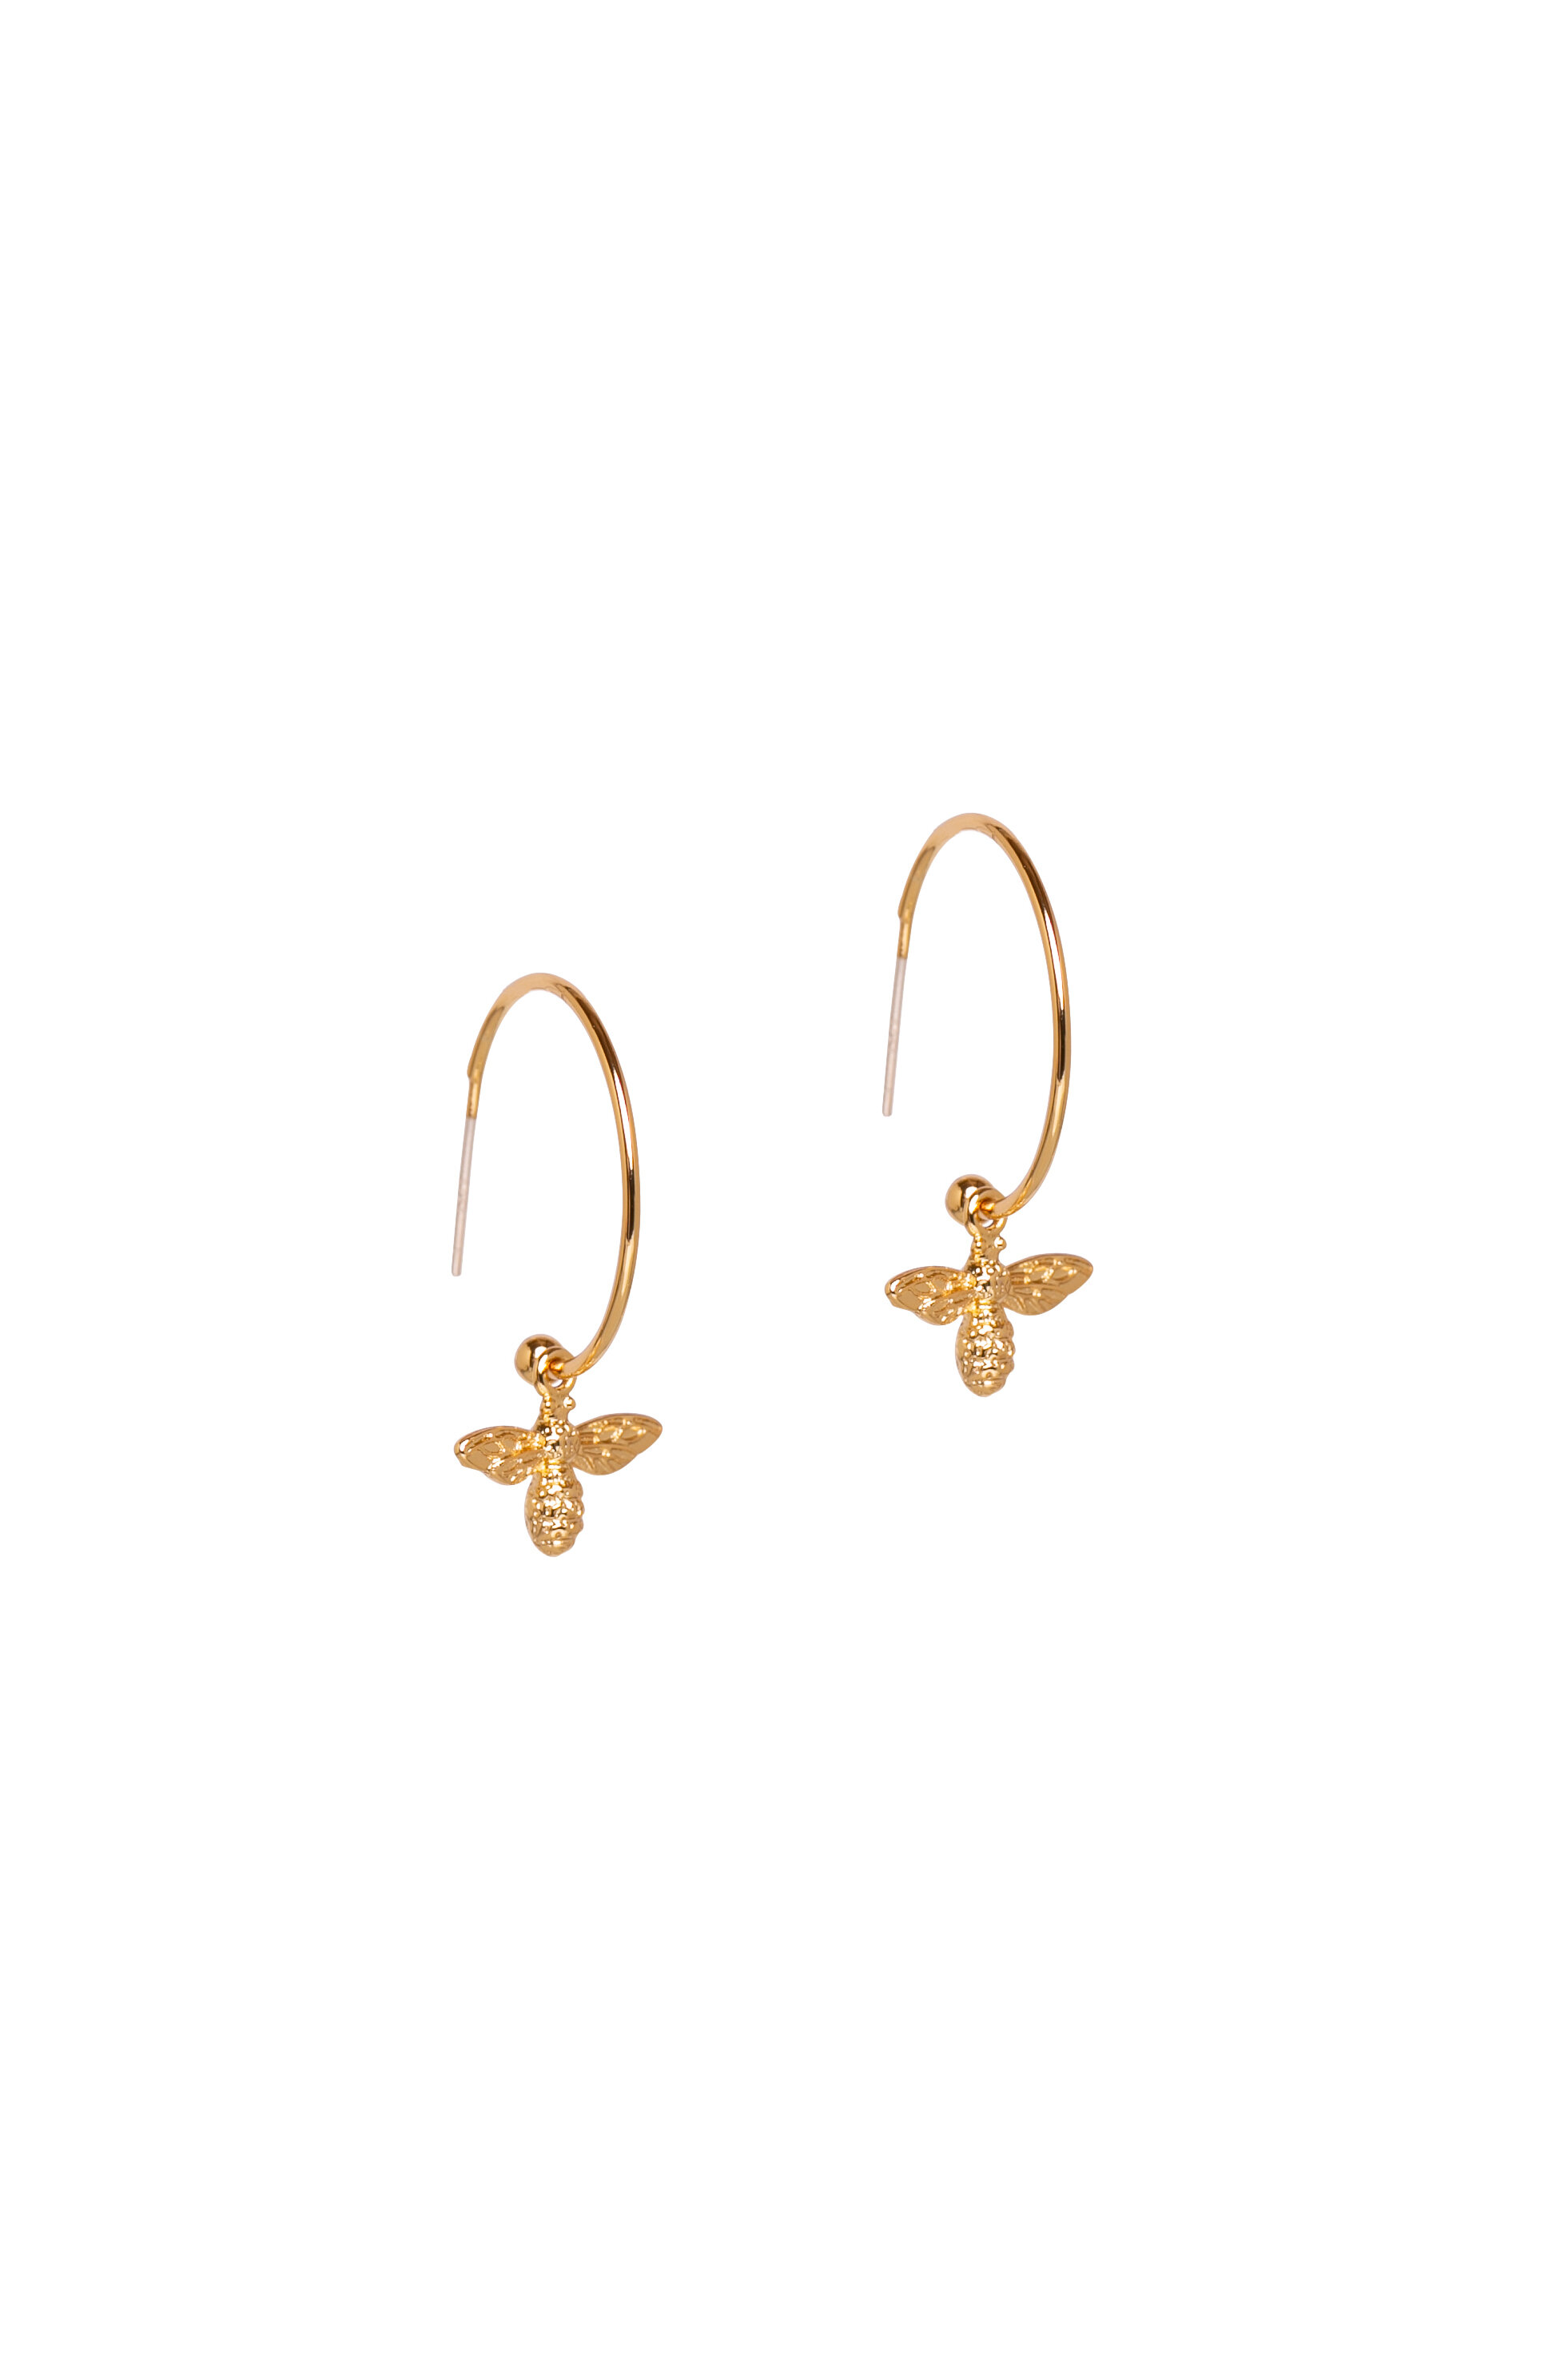 Small (20mm) Gold Plated Hoops with bee charm.jpg